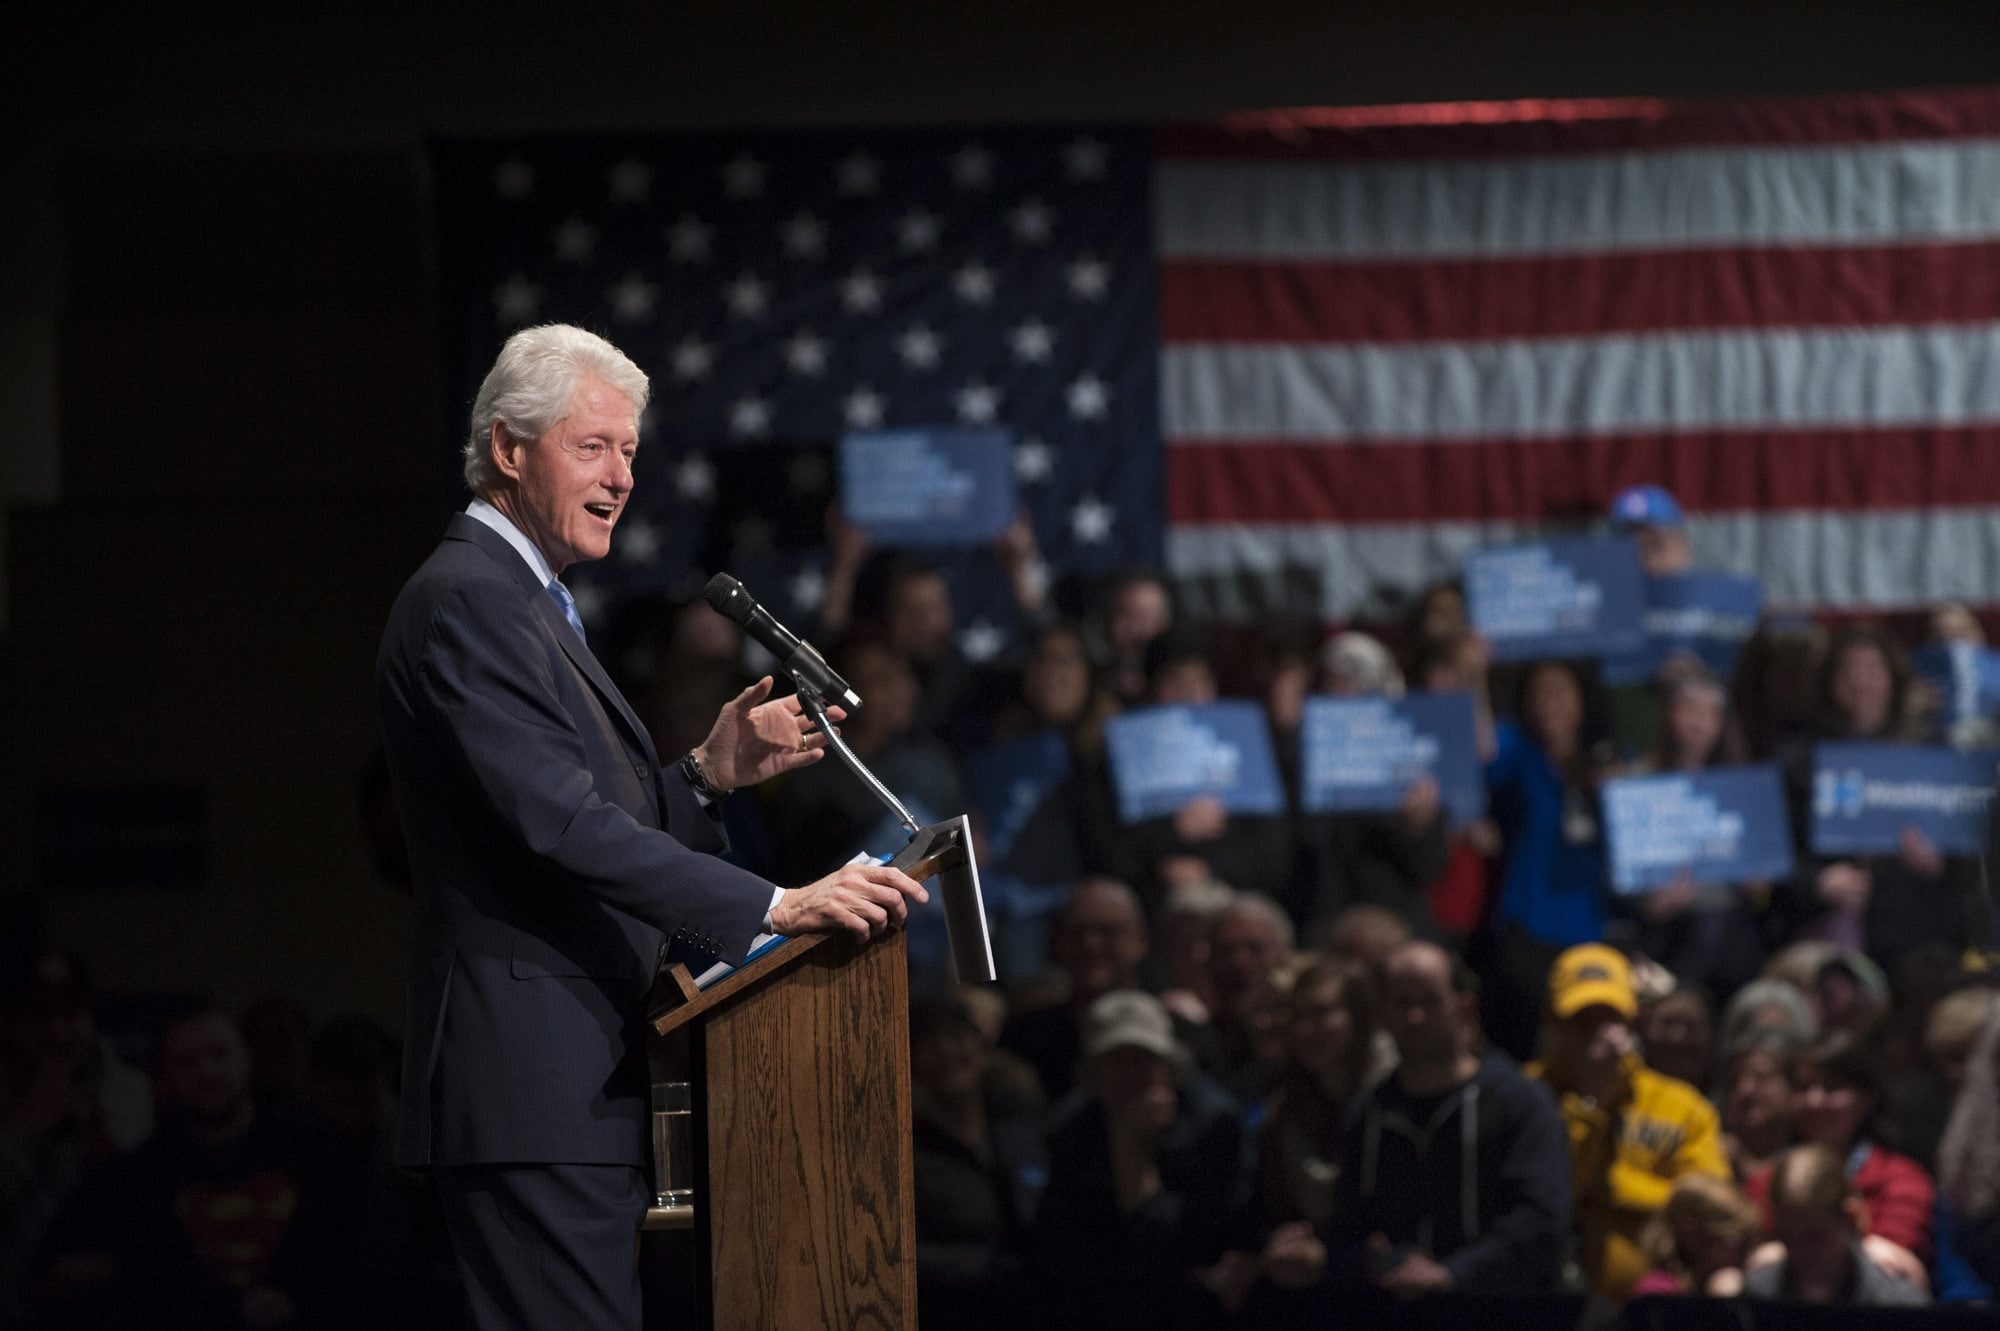 Former President Bill Clinton addresses the crowd at Clark College earlier this year during his third visit to Clark County.